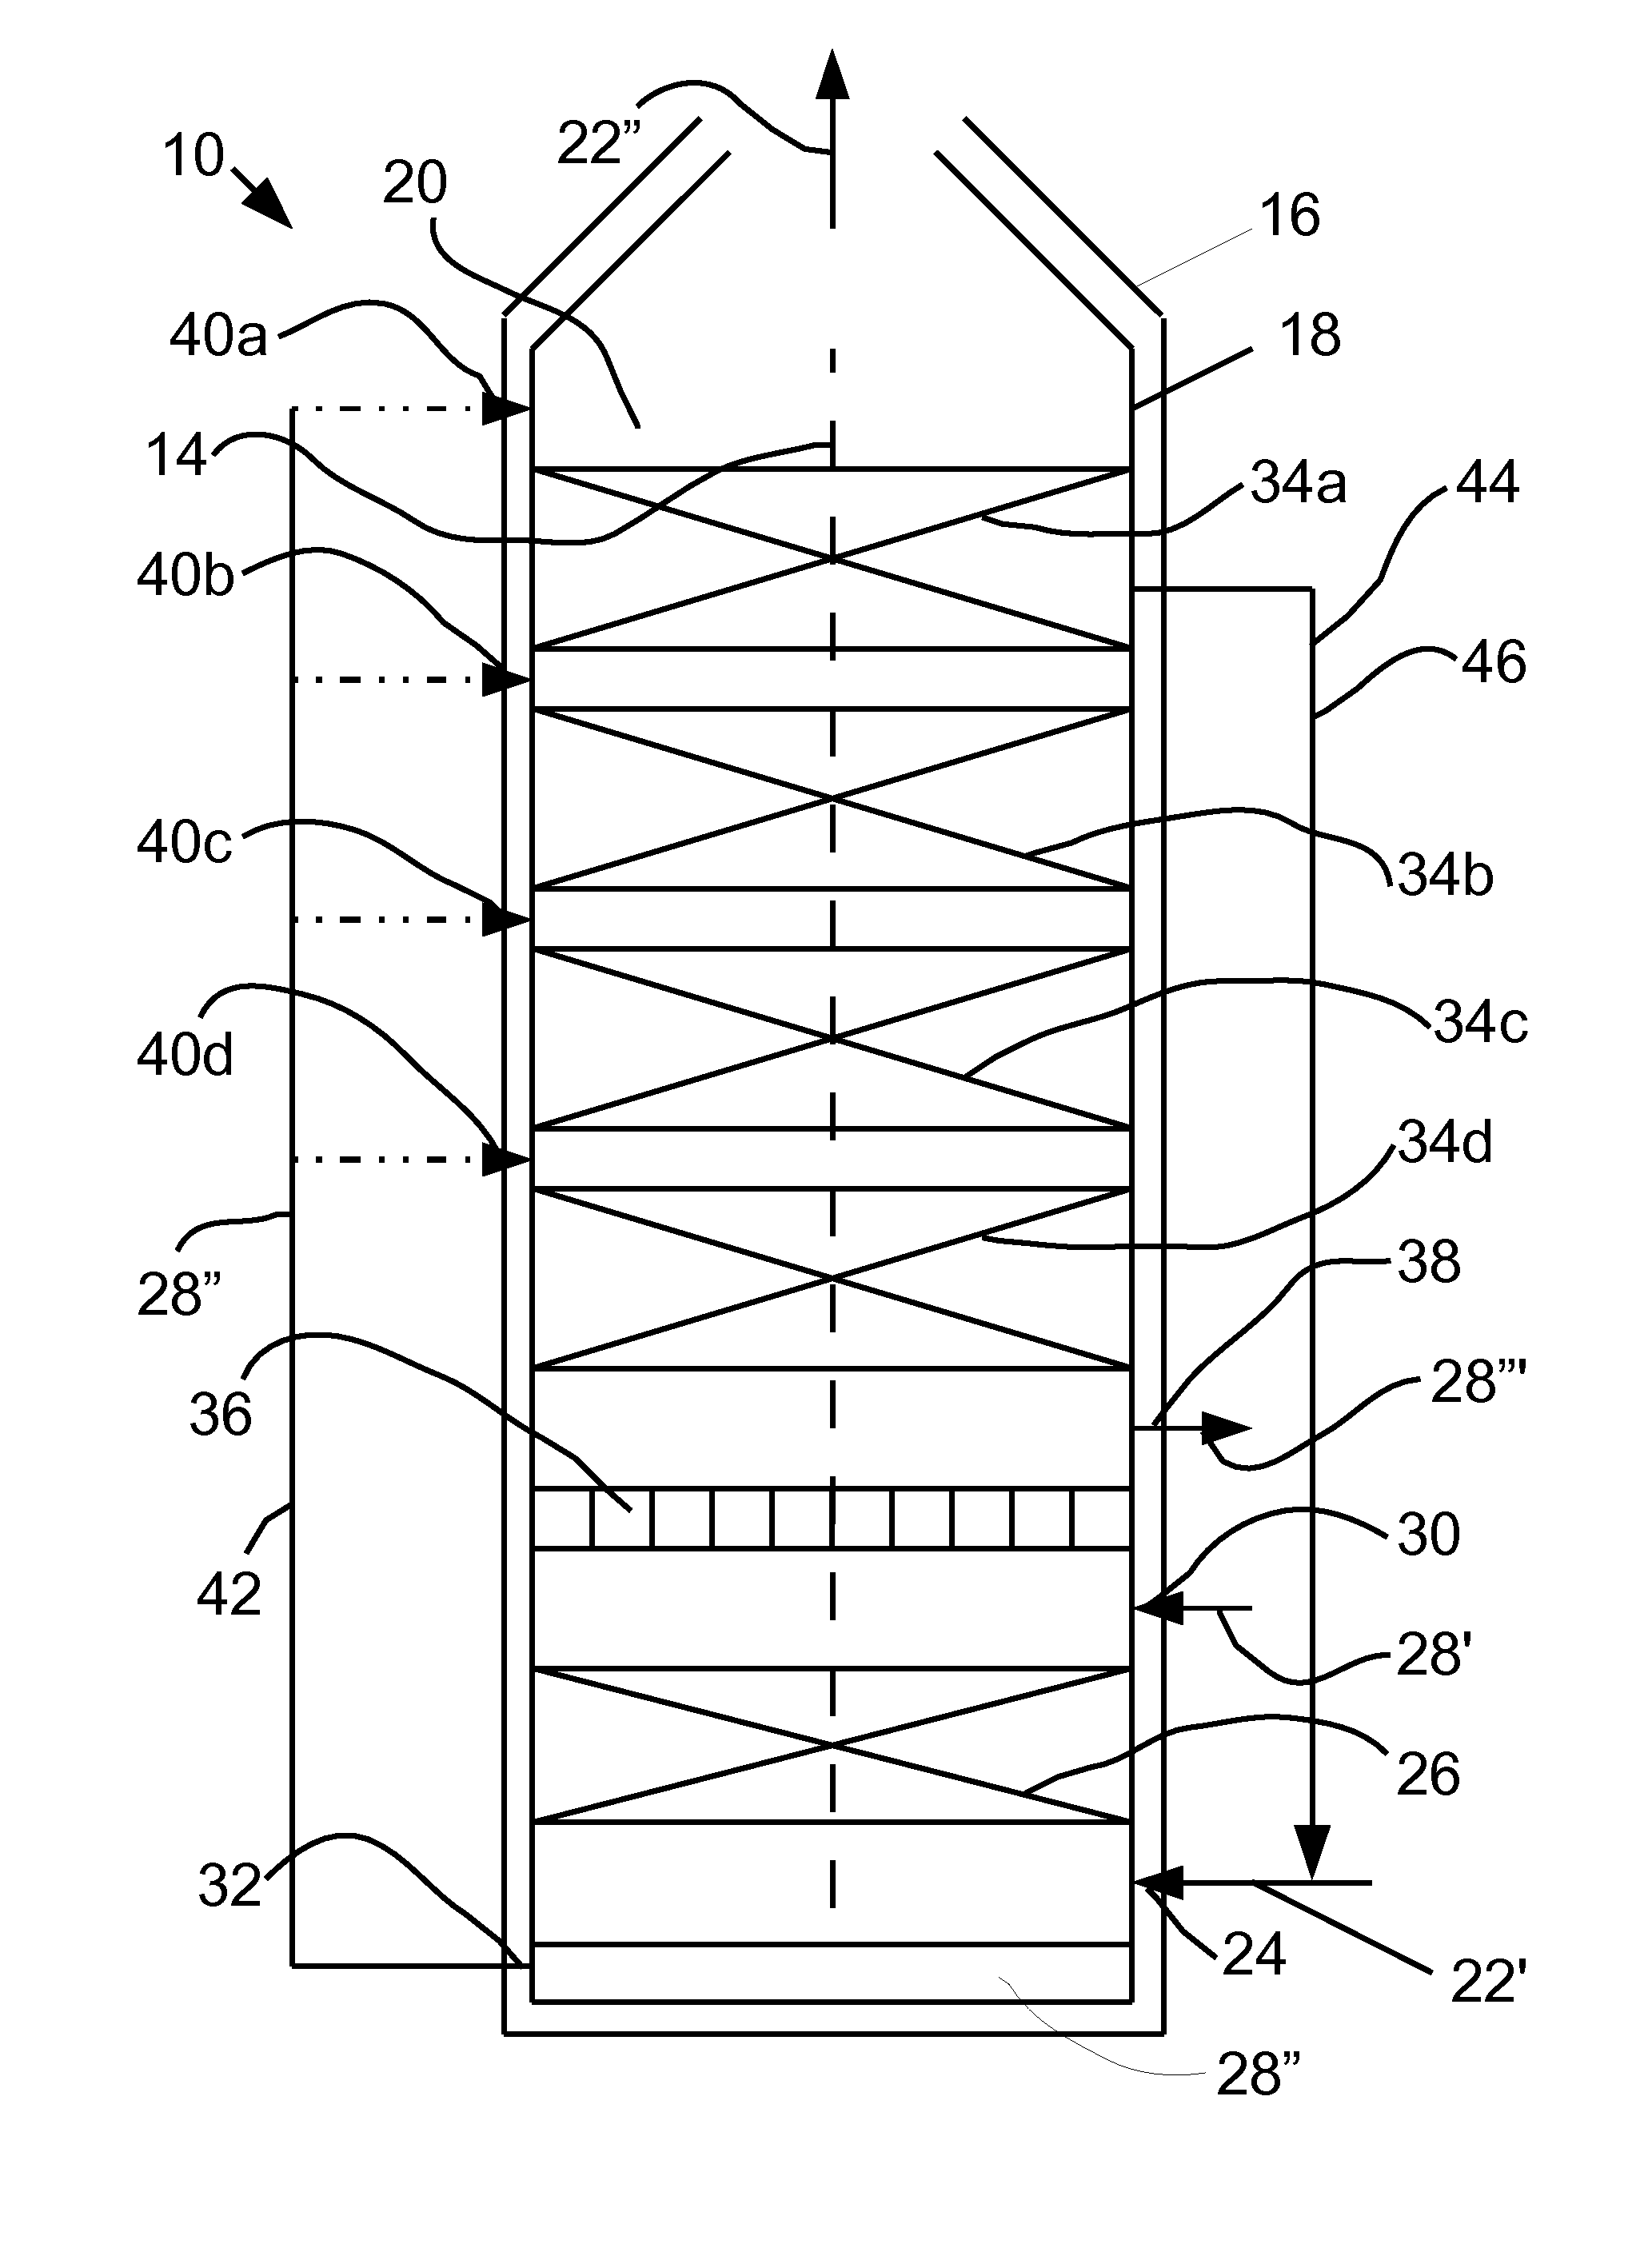 Shipboard Vessel Having a Vertically Aligned Scrubber and Process Component